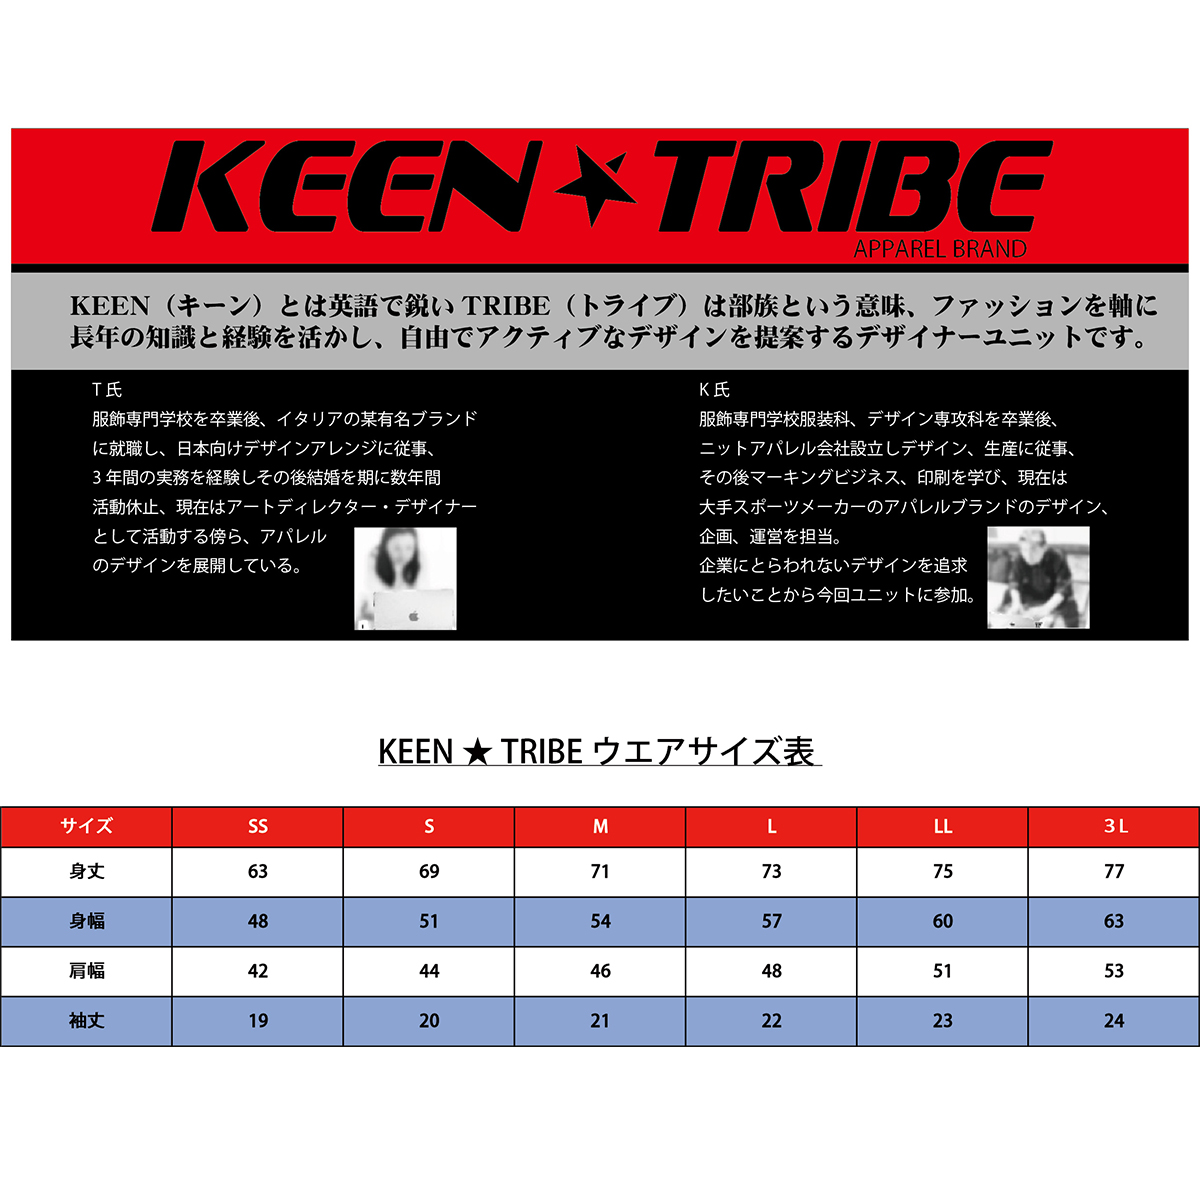 KEEN ★ TRIBE　KT-78(受注生産)